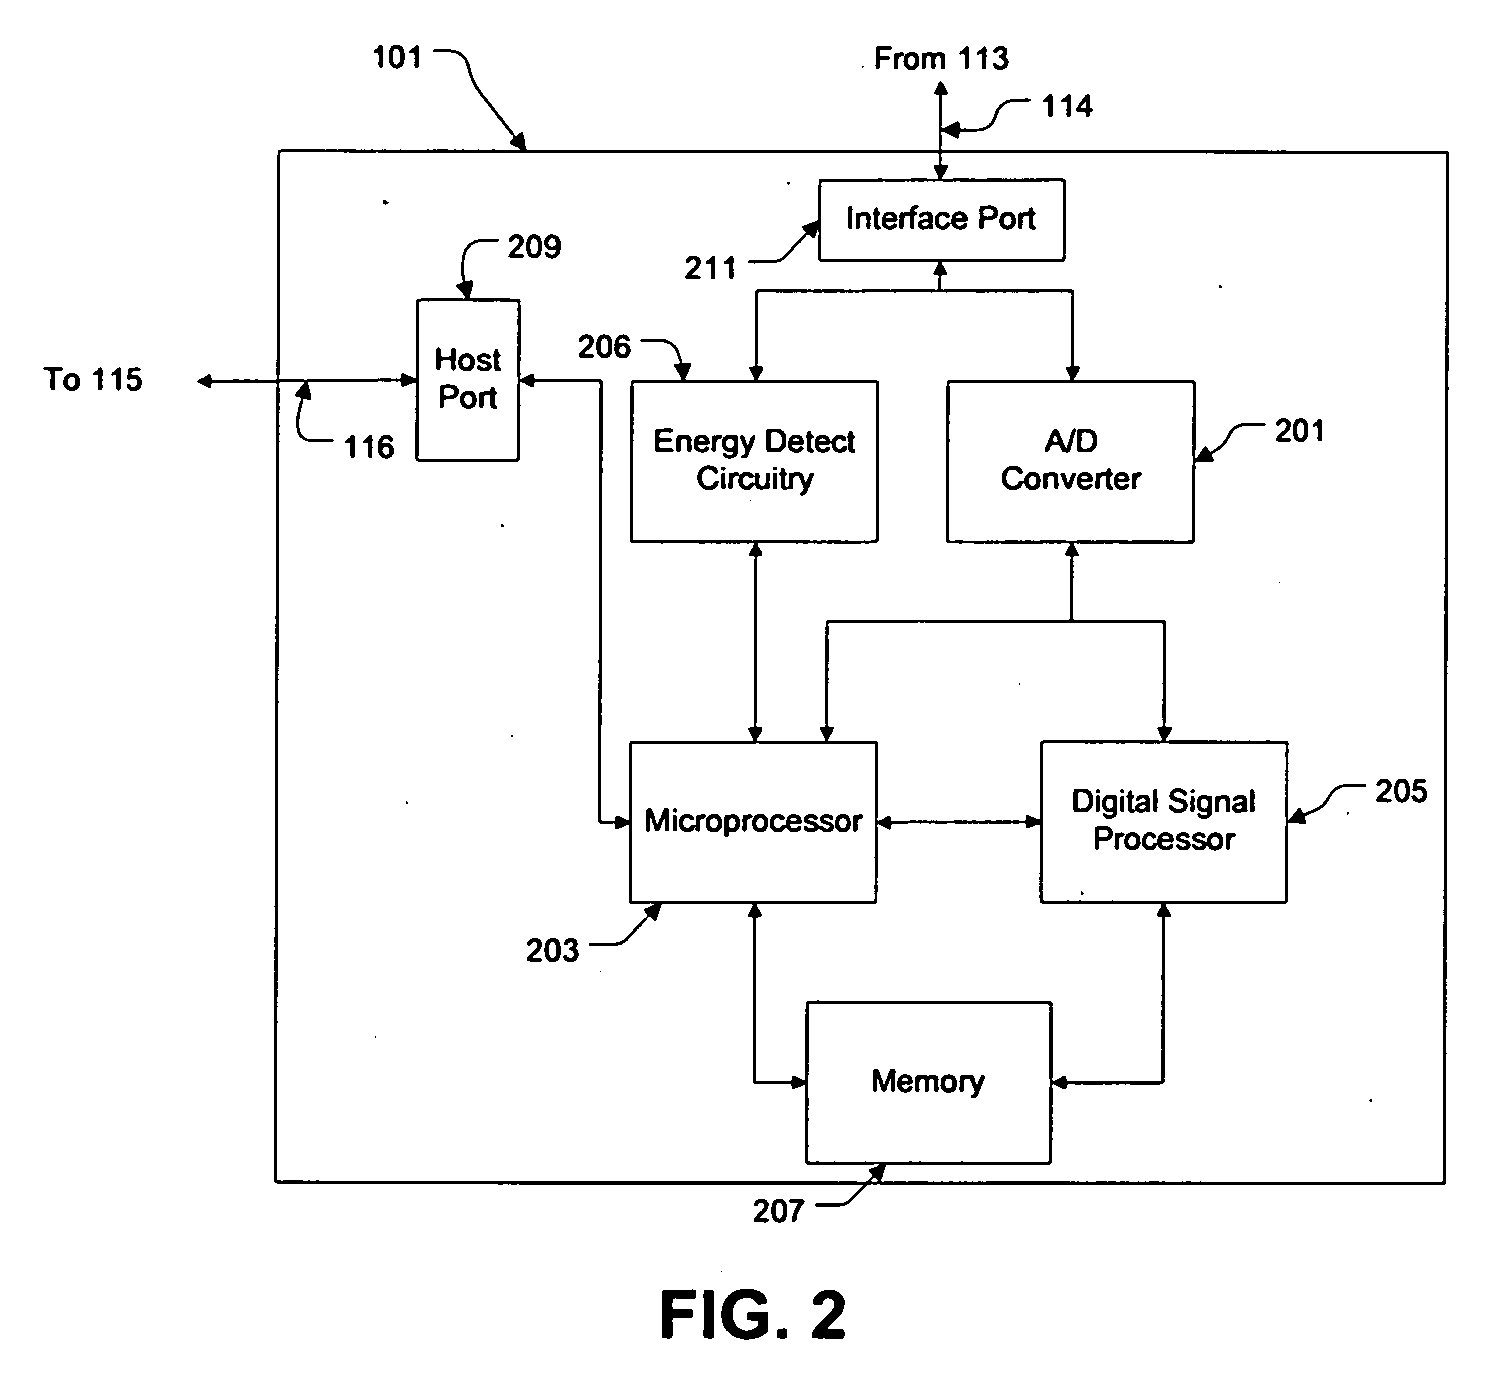 System and method for detecting three-way call circumvention attempts